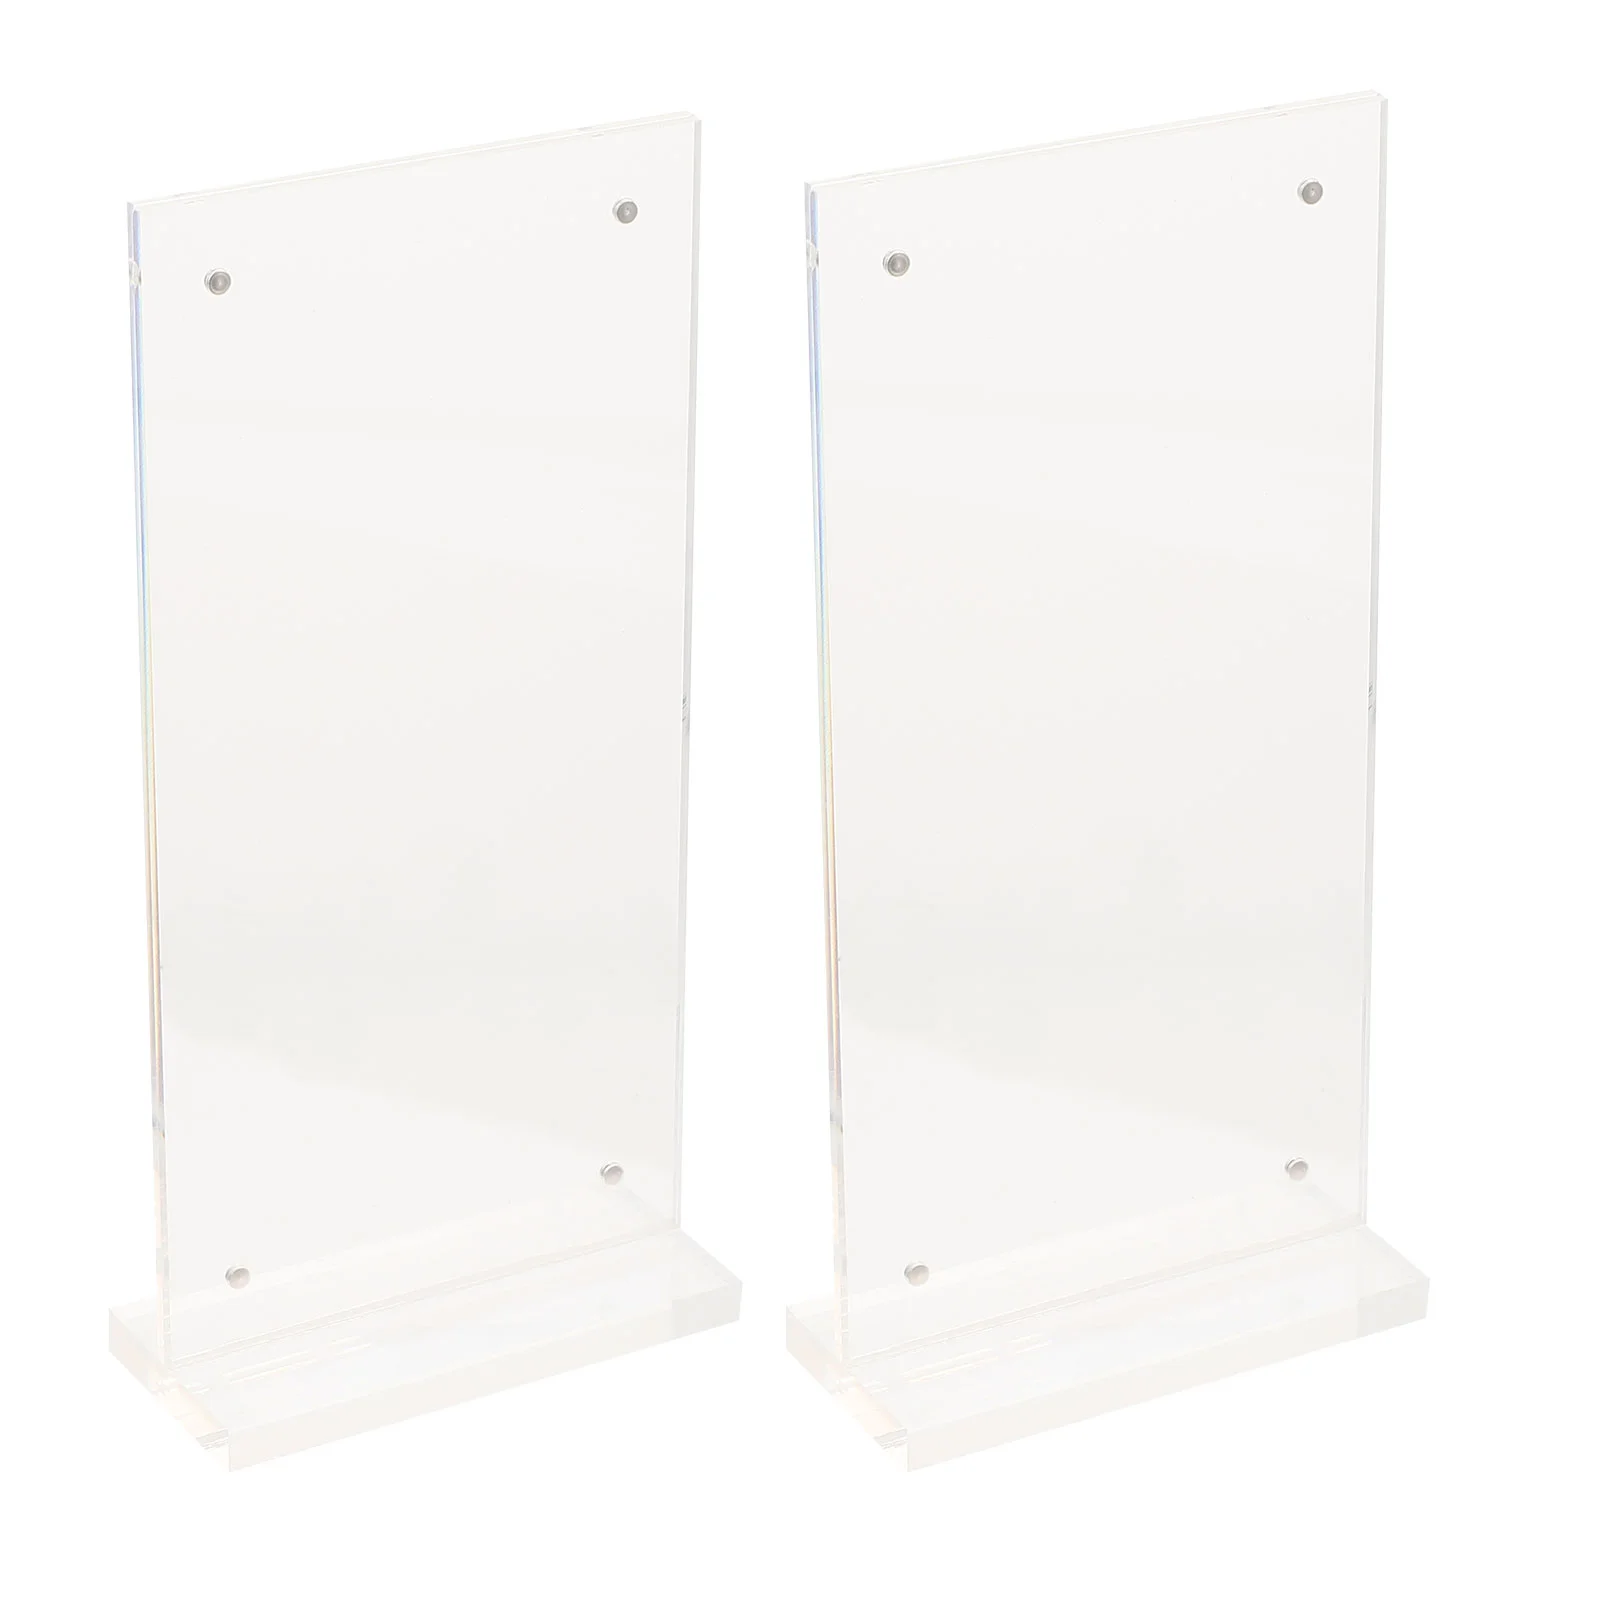 2Pcs Magnetic Acrylic Display Stand Table Menu Holder Clear Signs Centerpiece Decoration